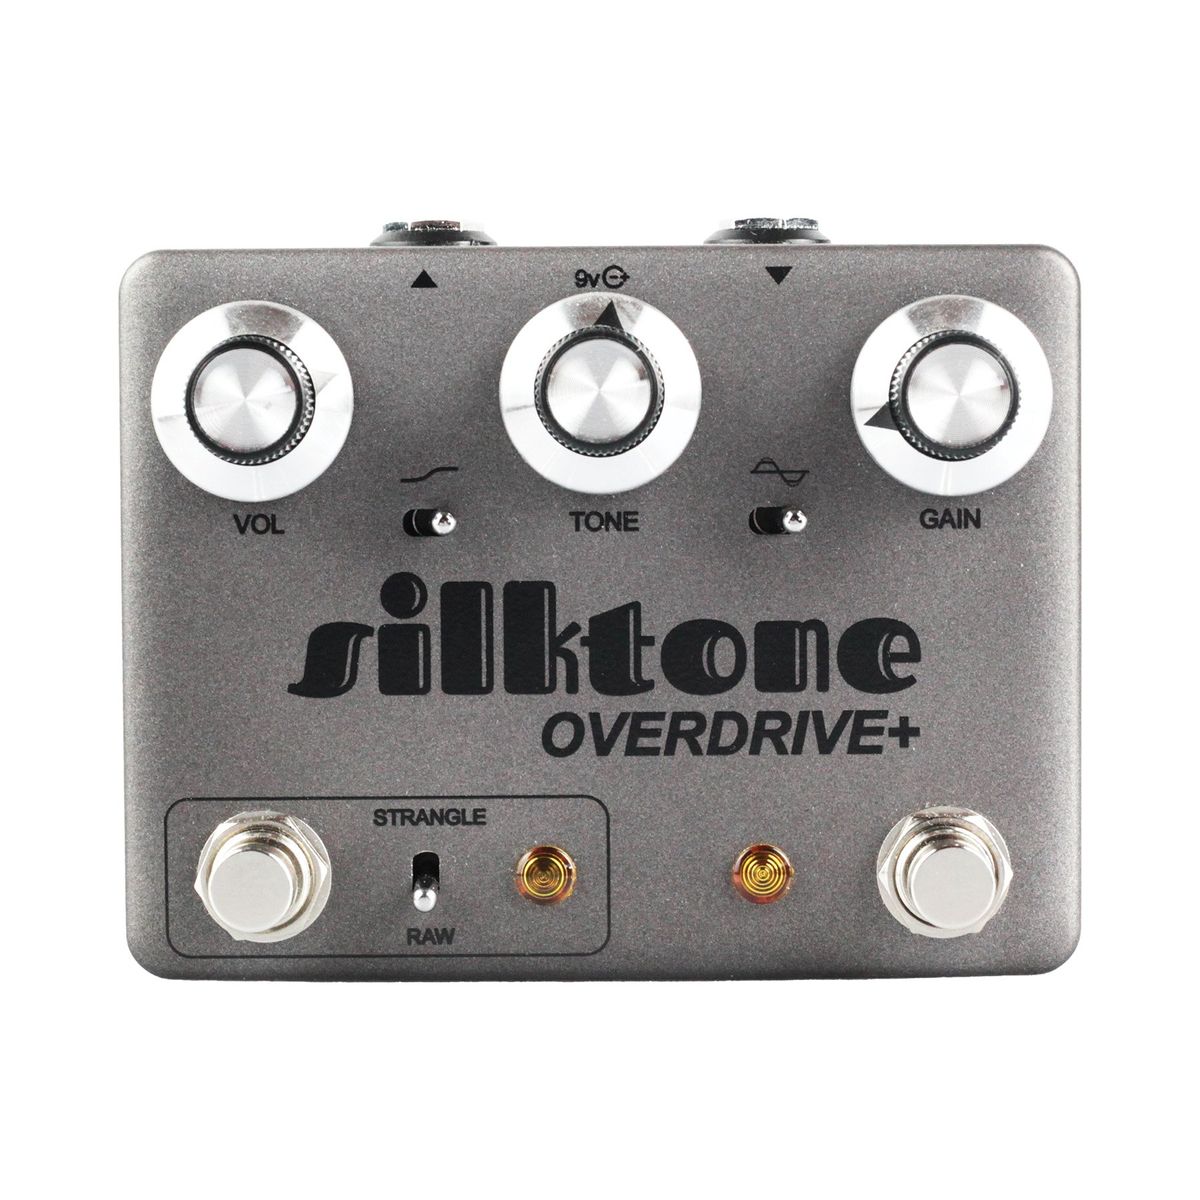 Silktone Overdrive+ Review